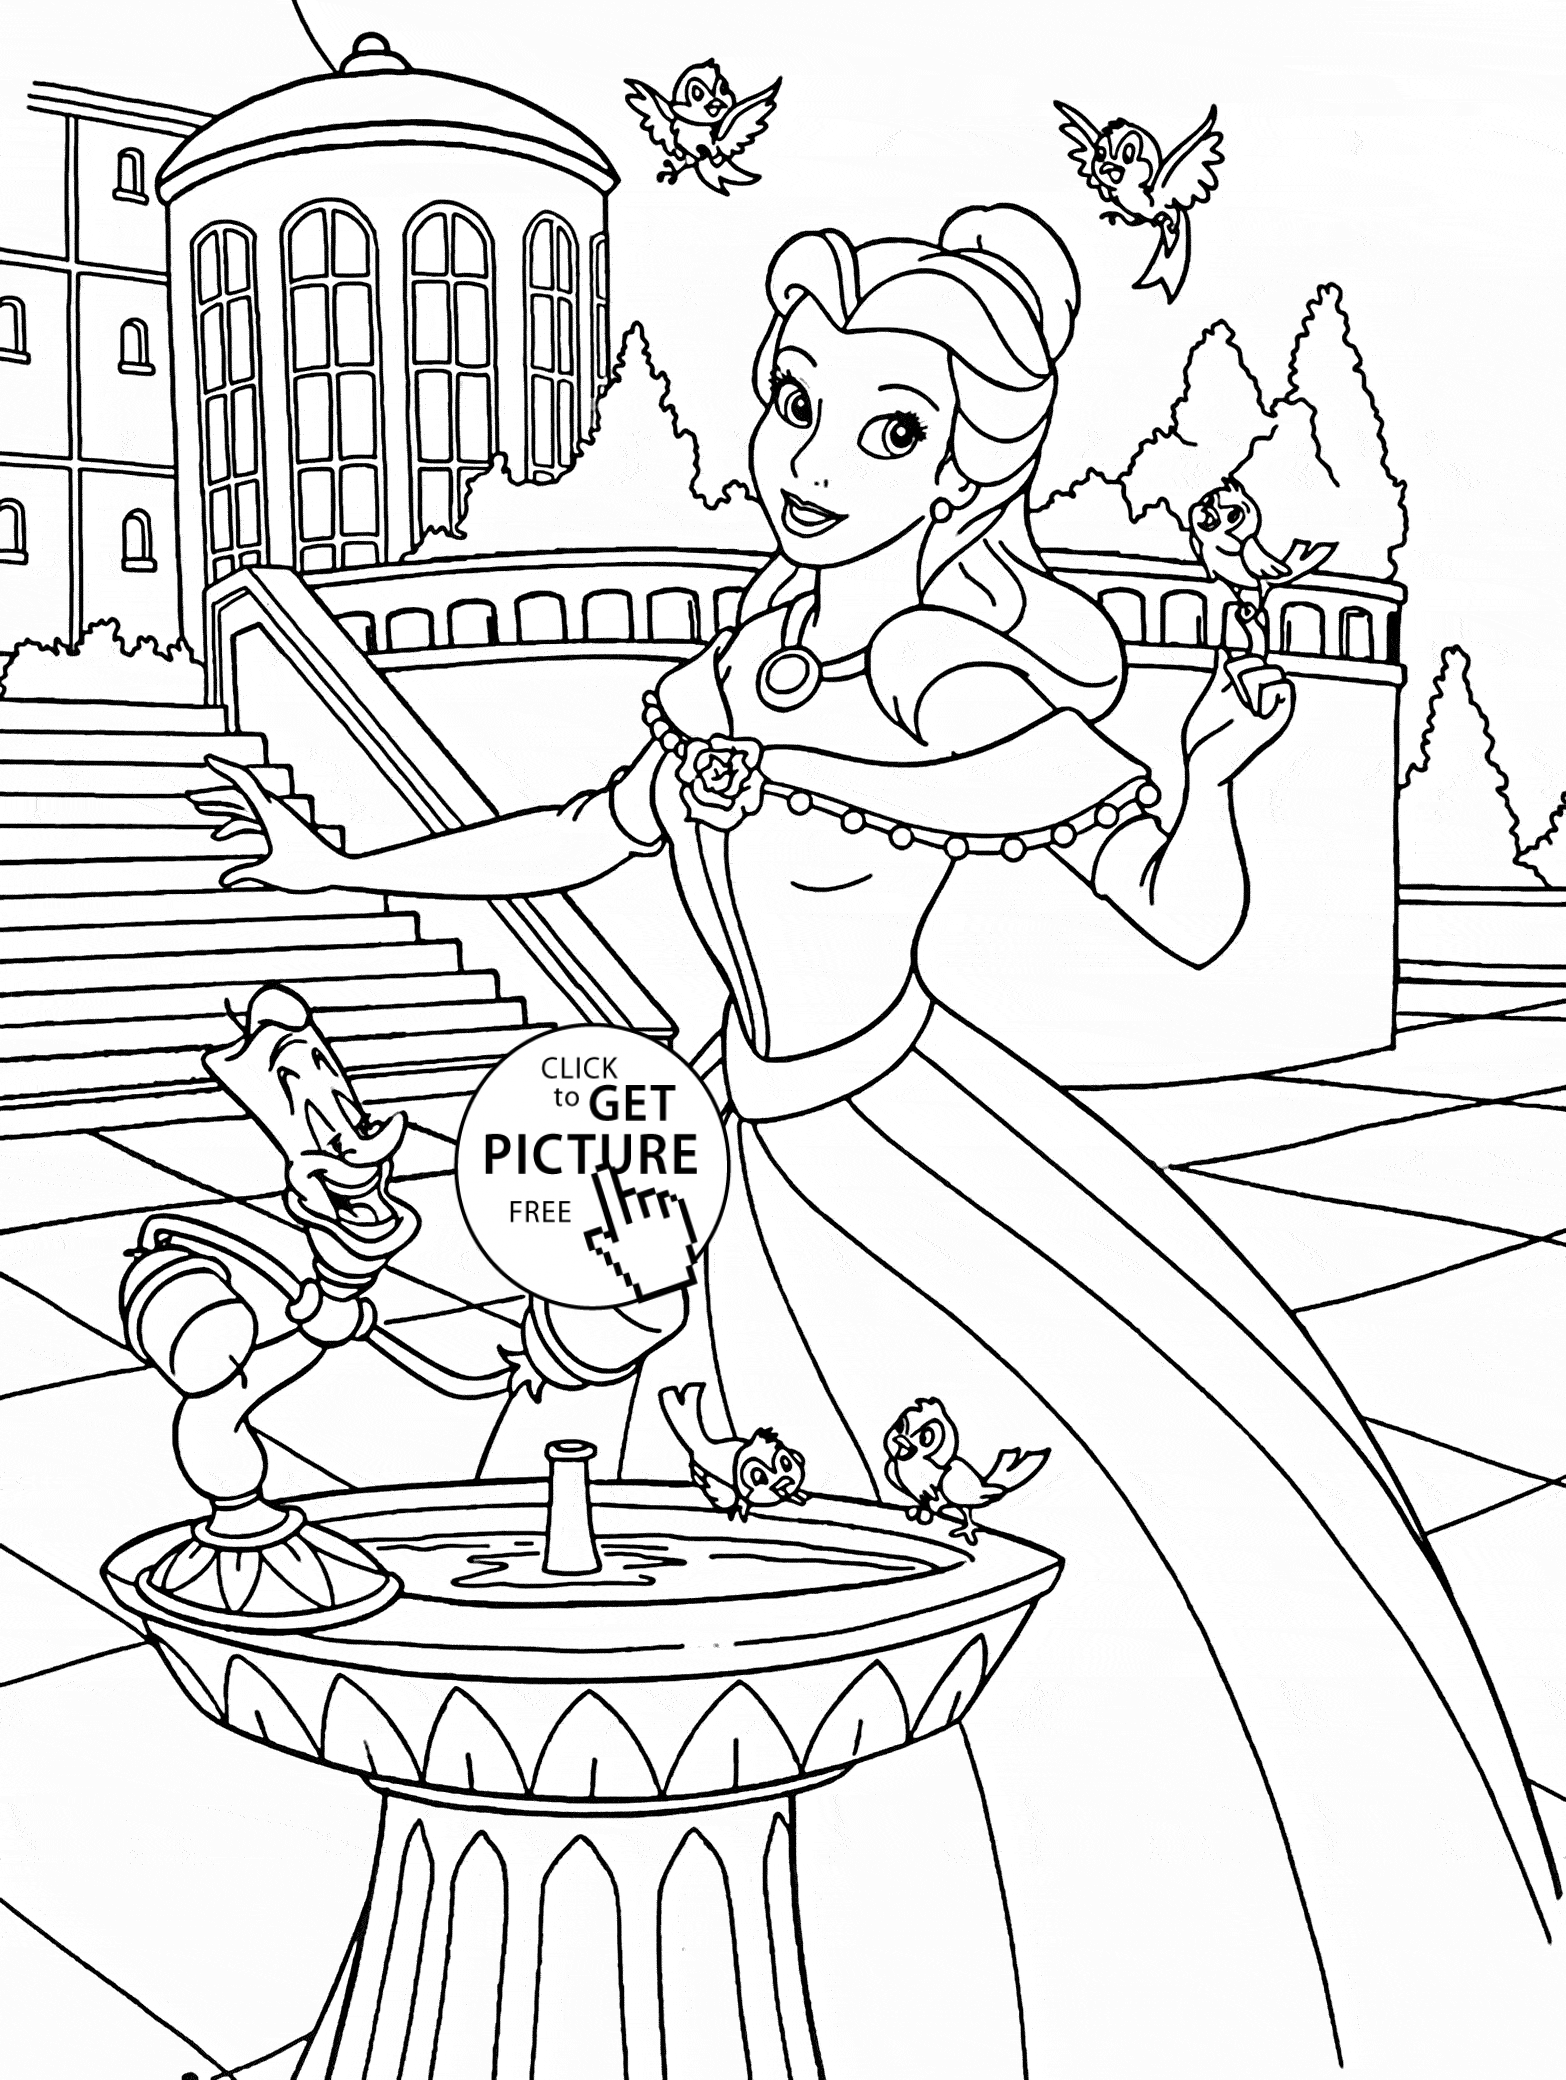 Ice Castle Coloring Pages - Learny Kids